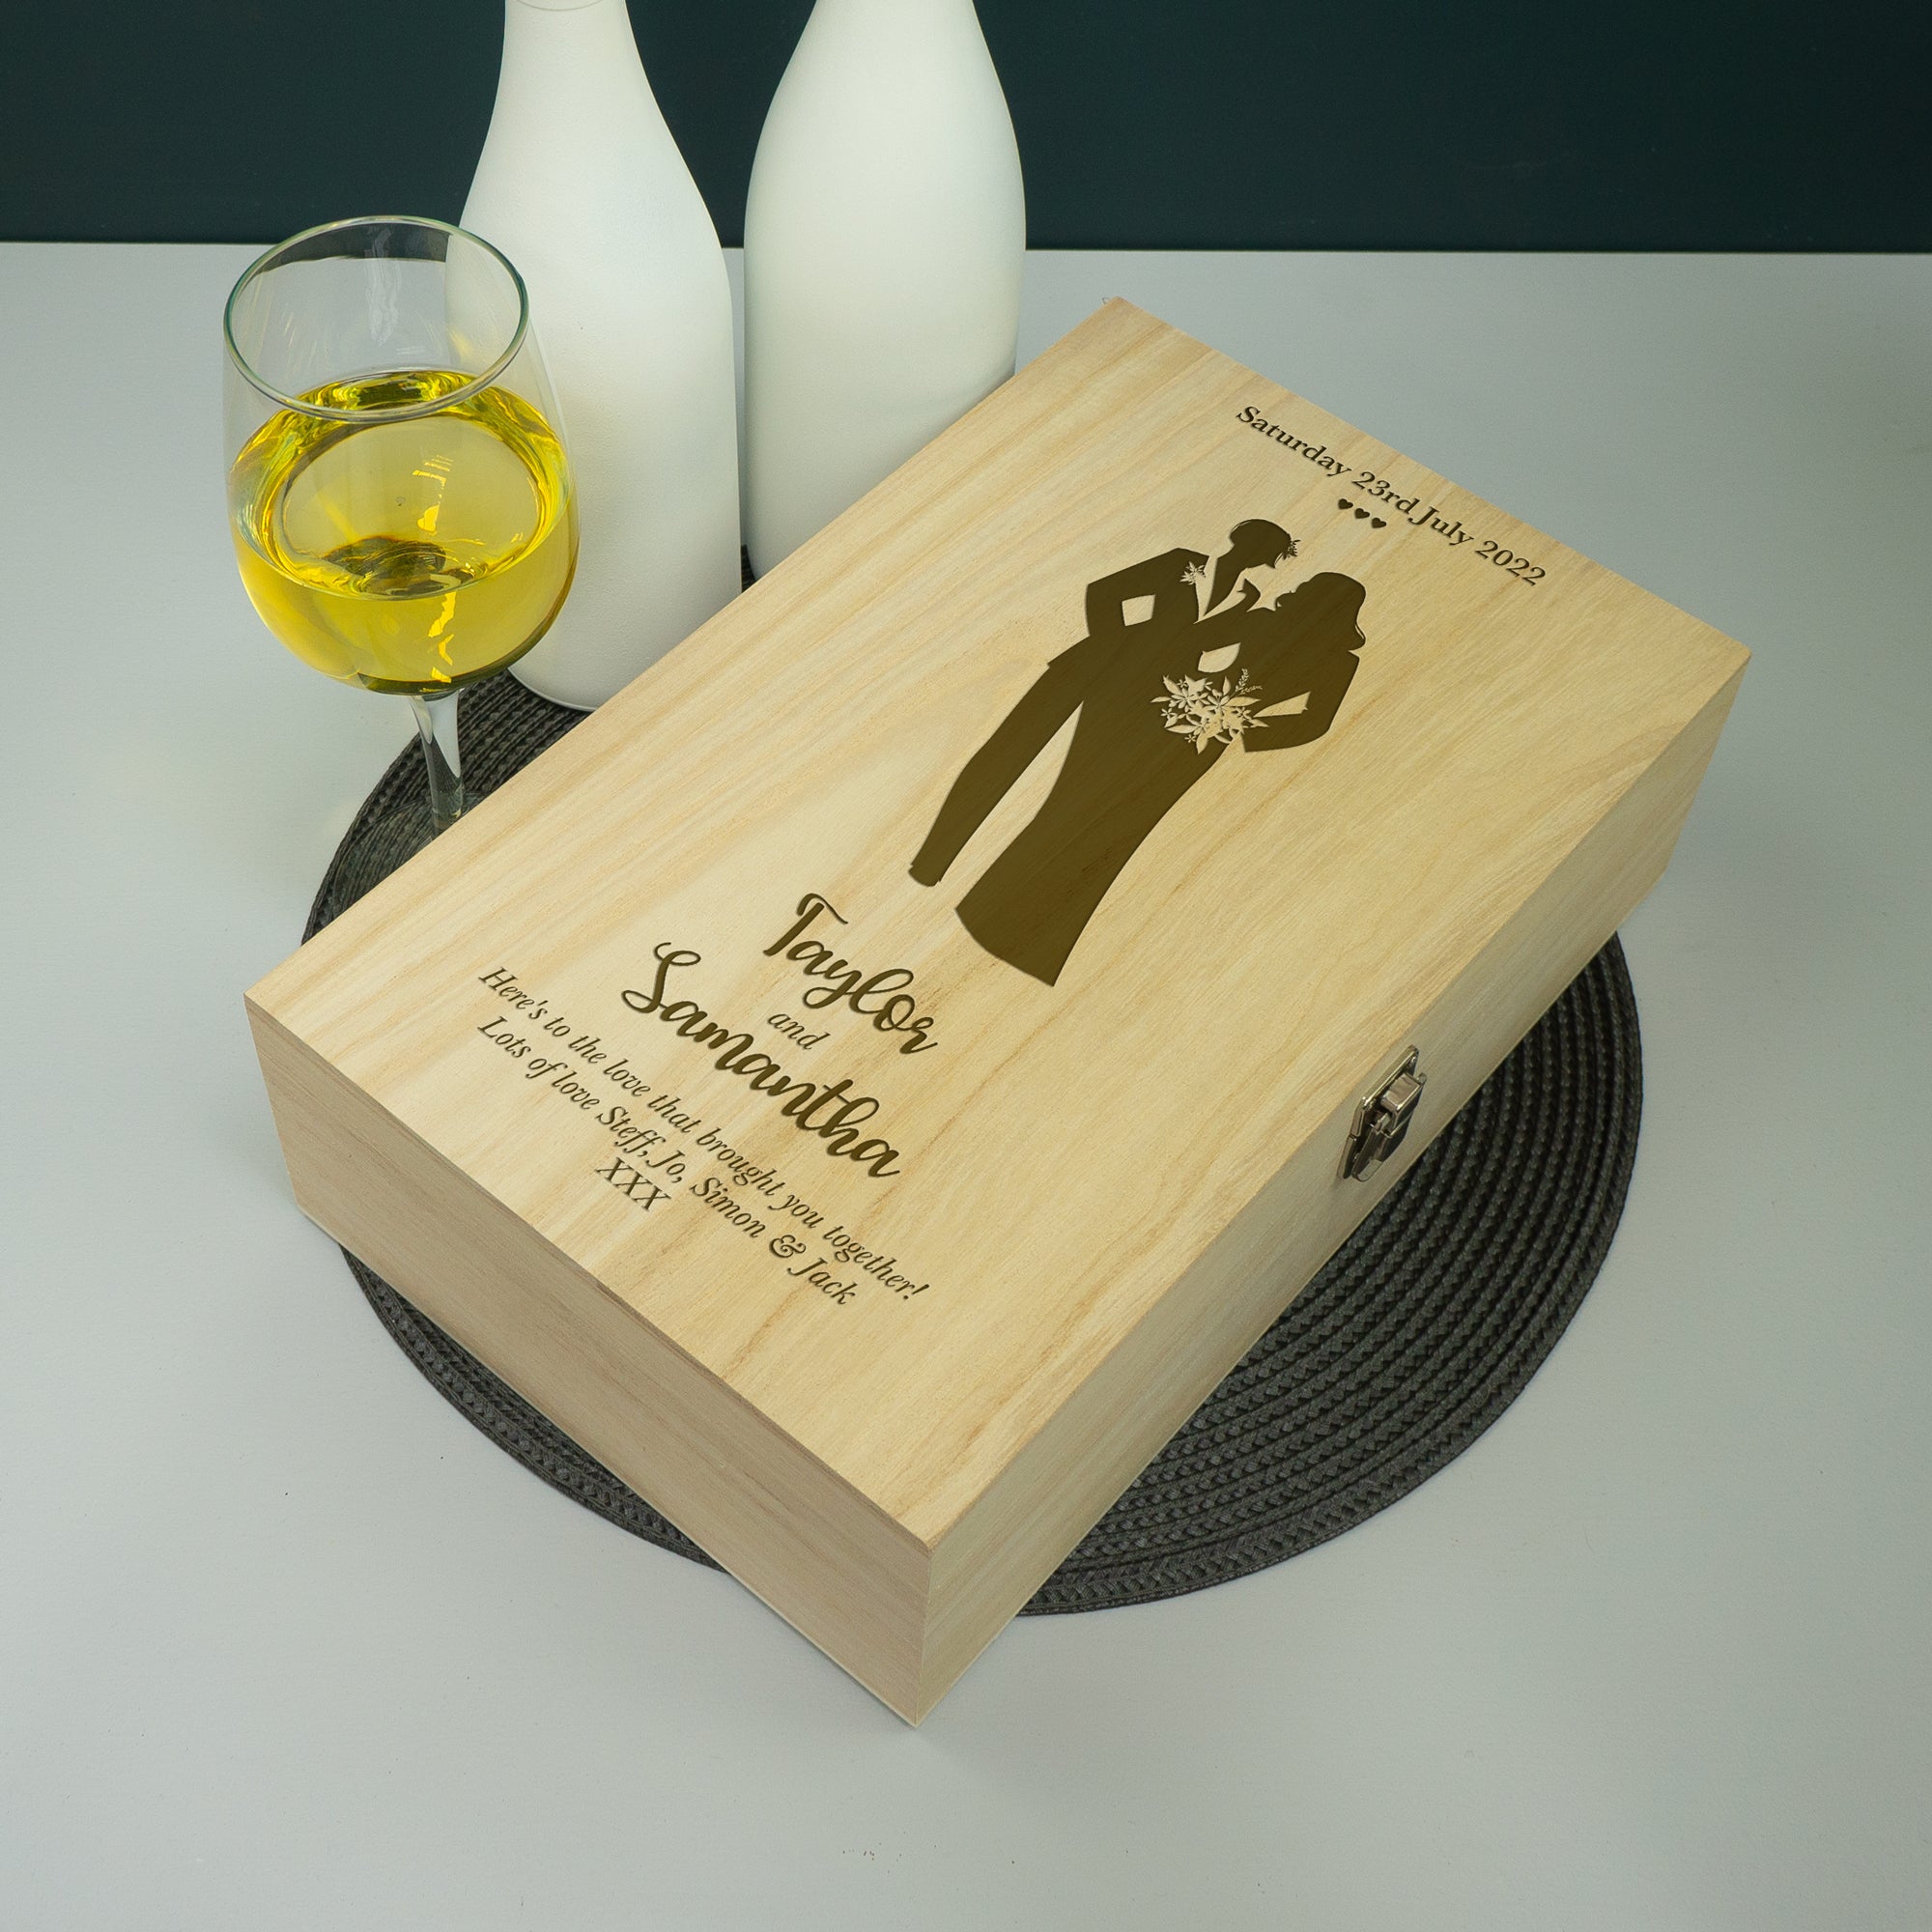 Lesbian bride and bride marriage twin champagne bottle gifting box